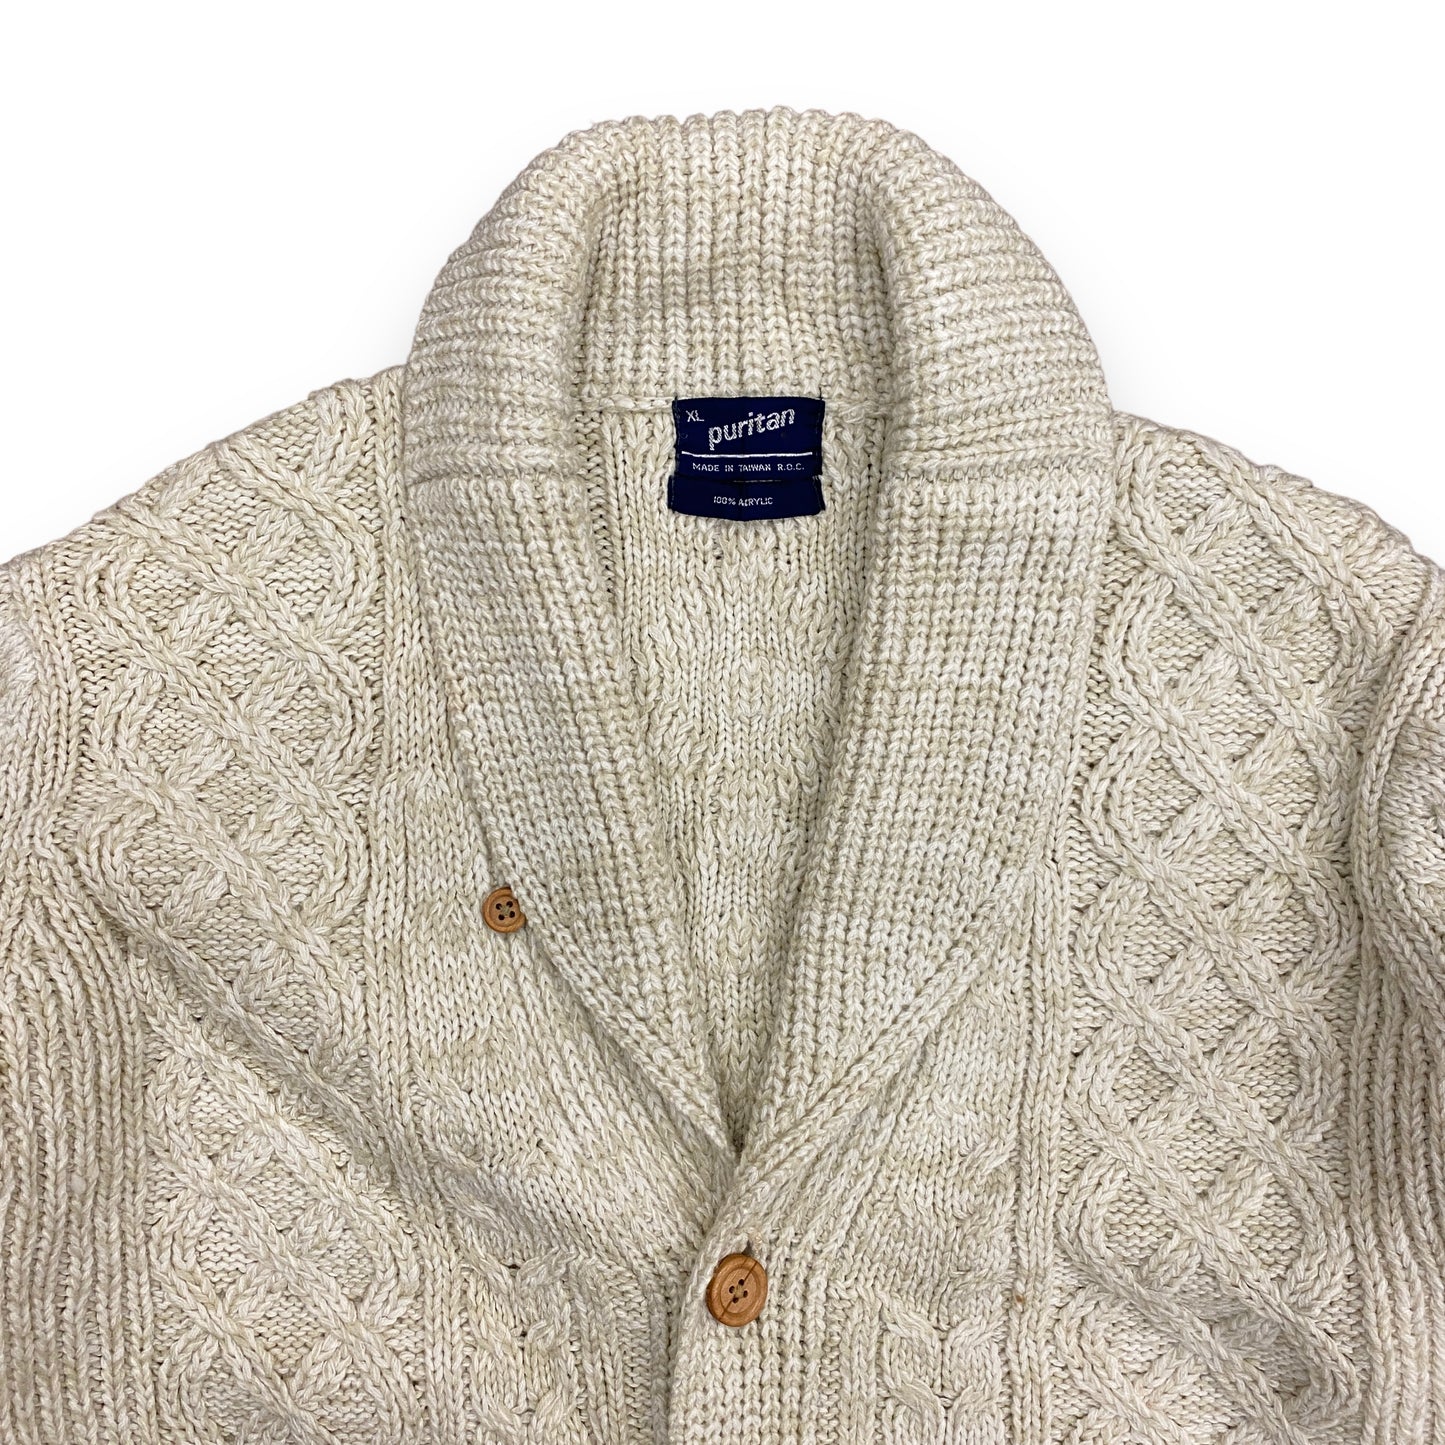 Vintage 1980s Puritan Cable Knit Shawl Collar Sweater - Size XL